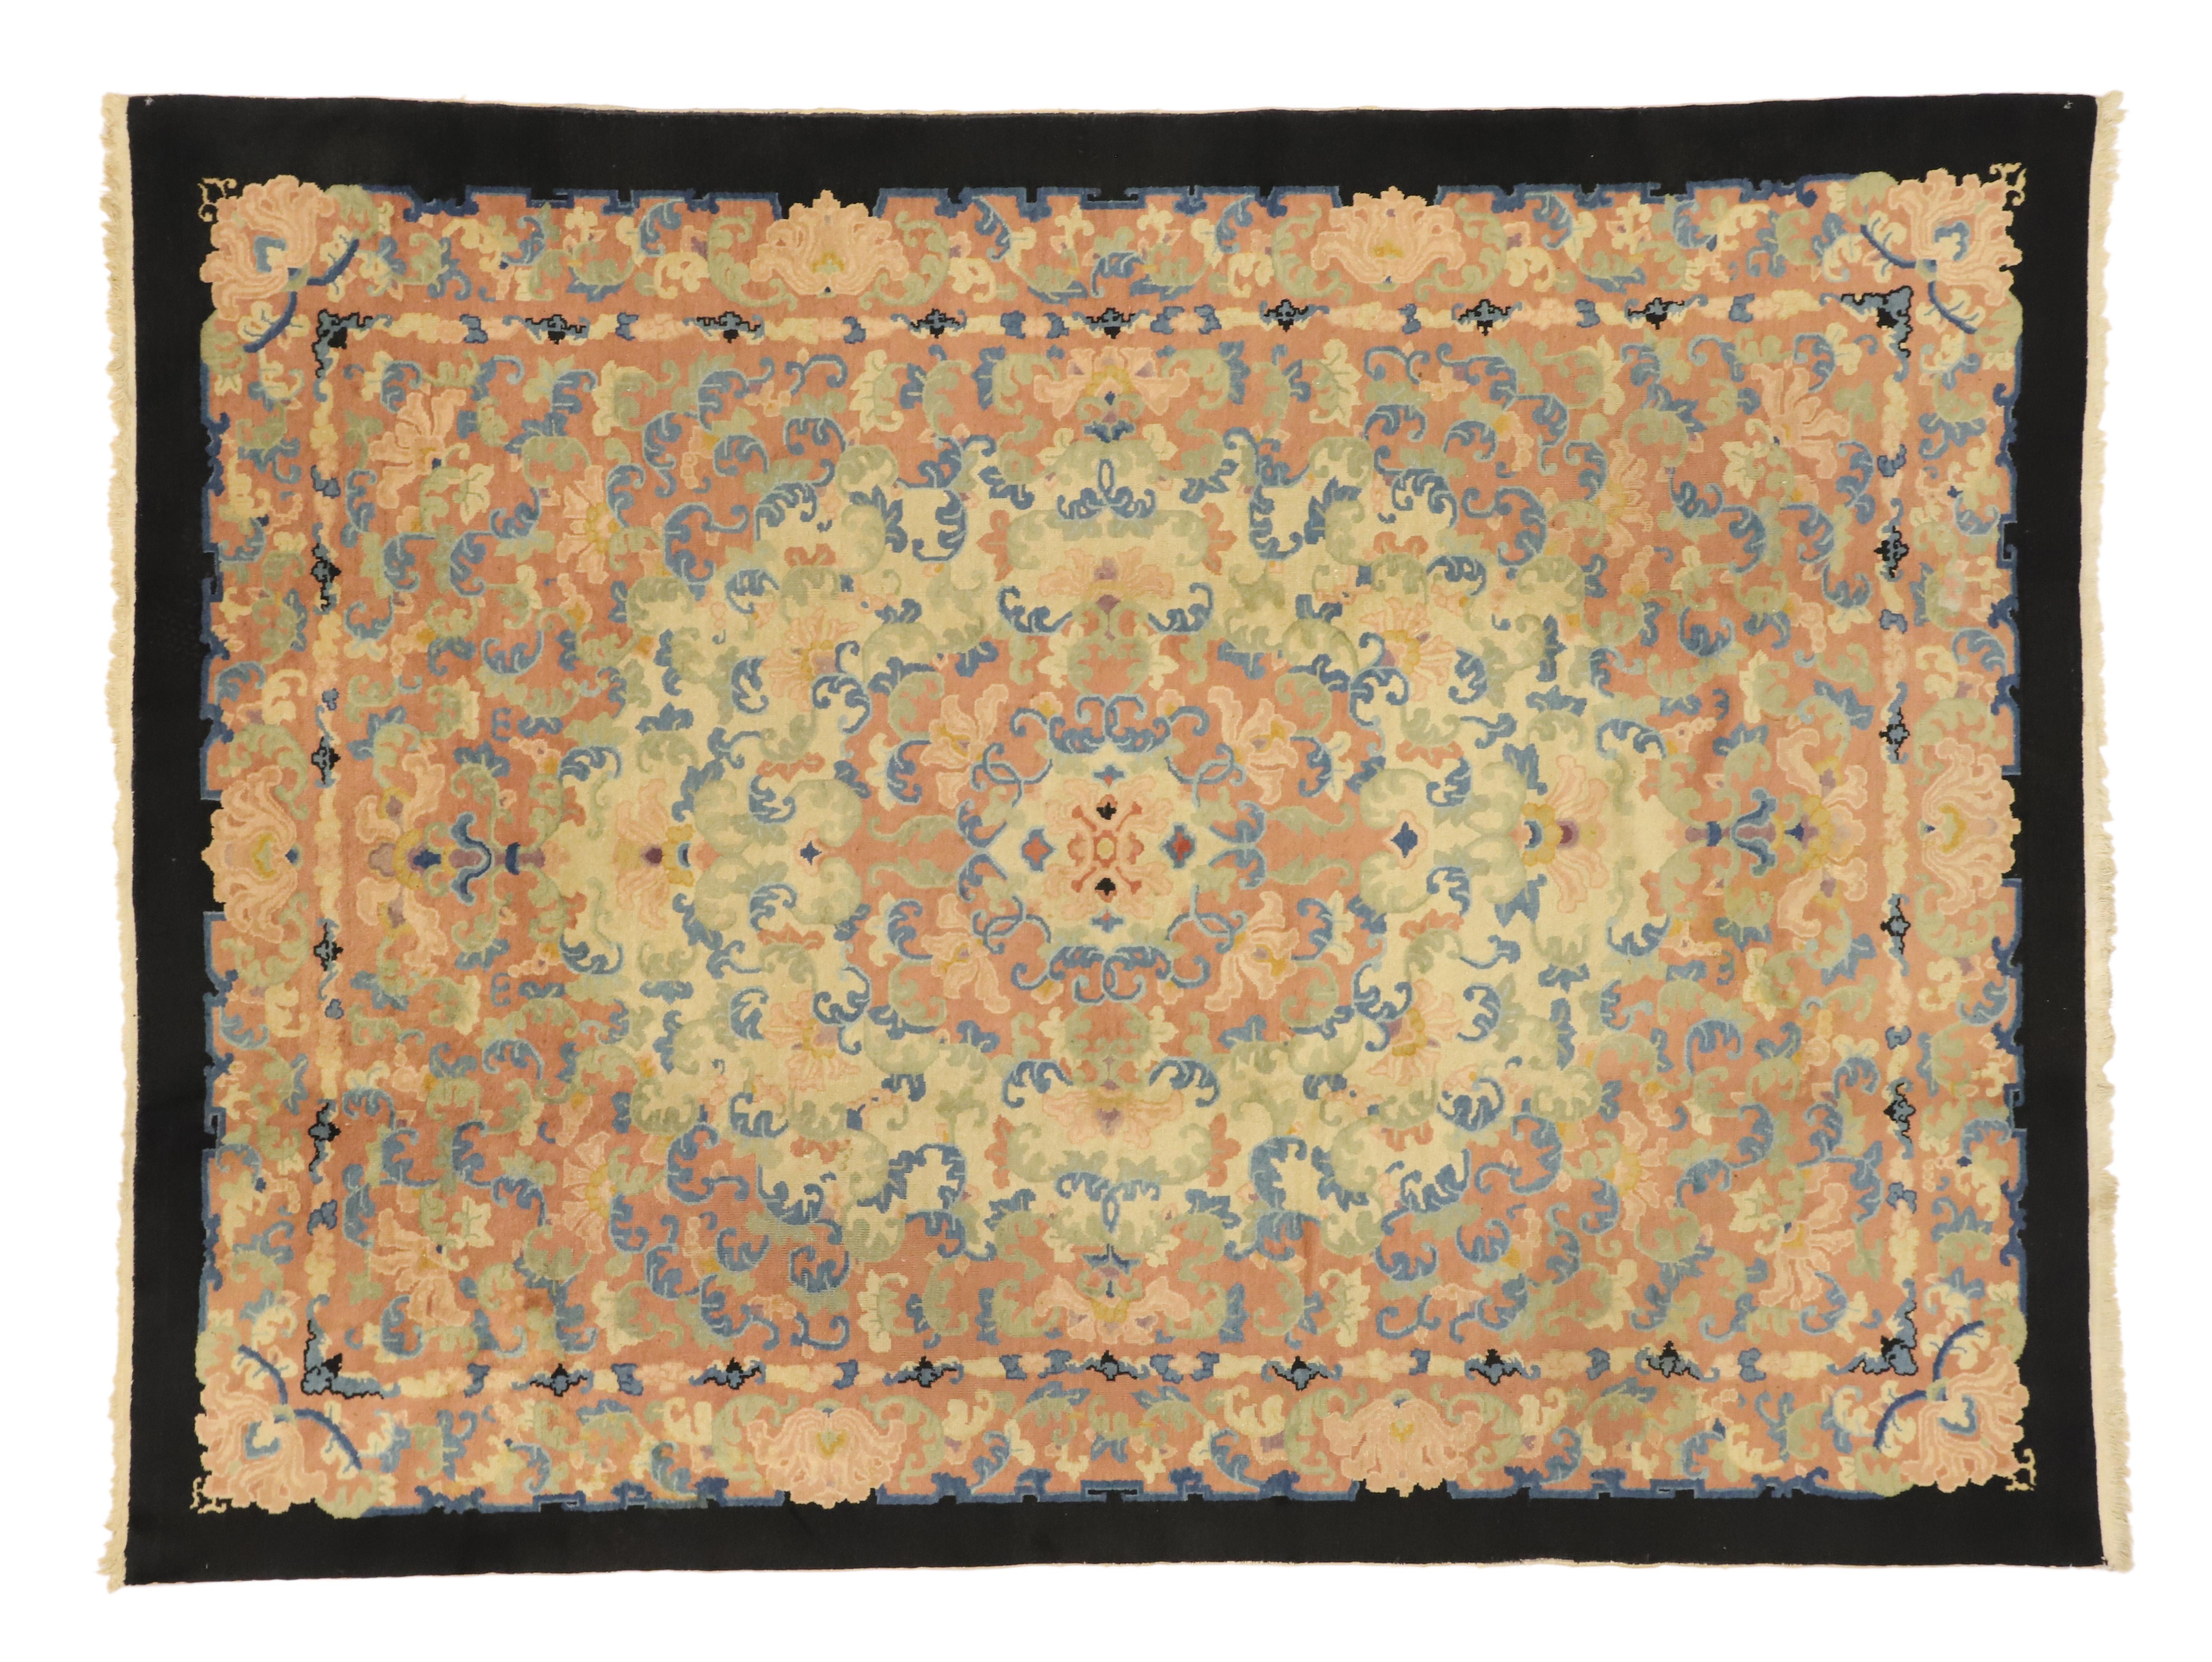 70240 Antique Chinese Peking Rug with Romantic French Country Style. This hand-knotted wool antique Chinese Peking rug was produced at the turn of the century. It features a round centre medallion surrounded by an all-over floral pattern of